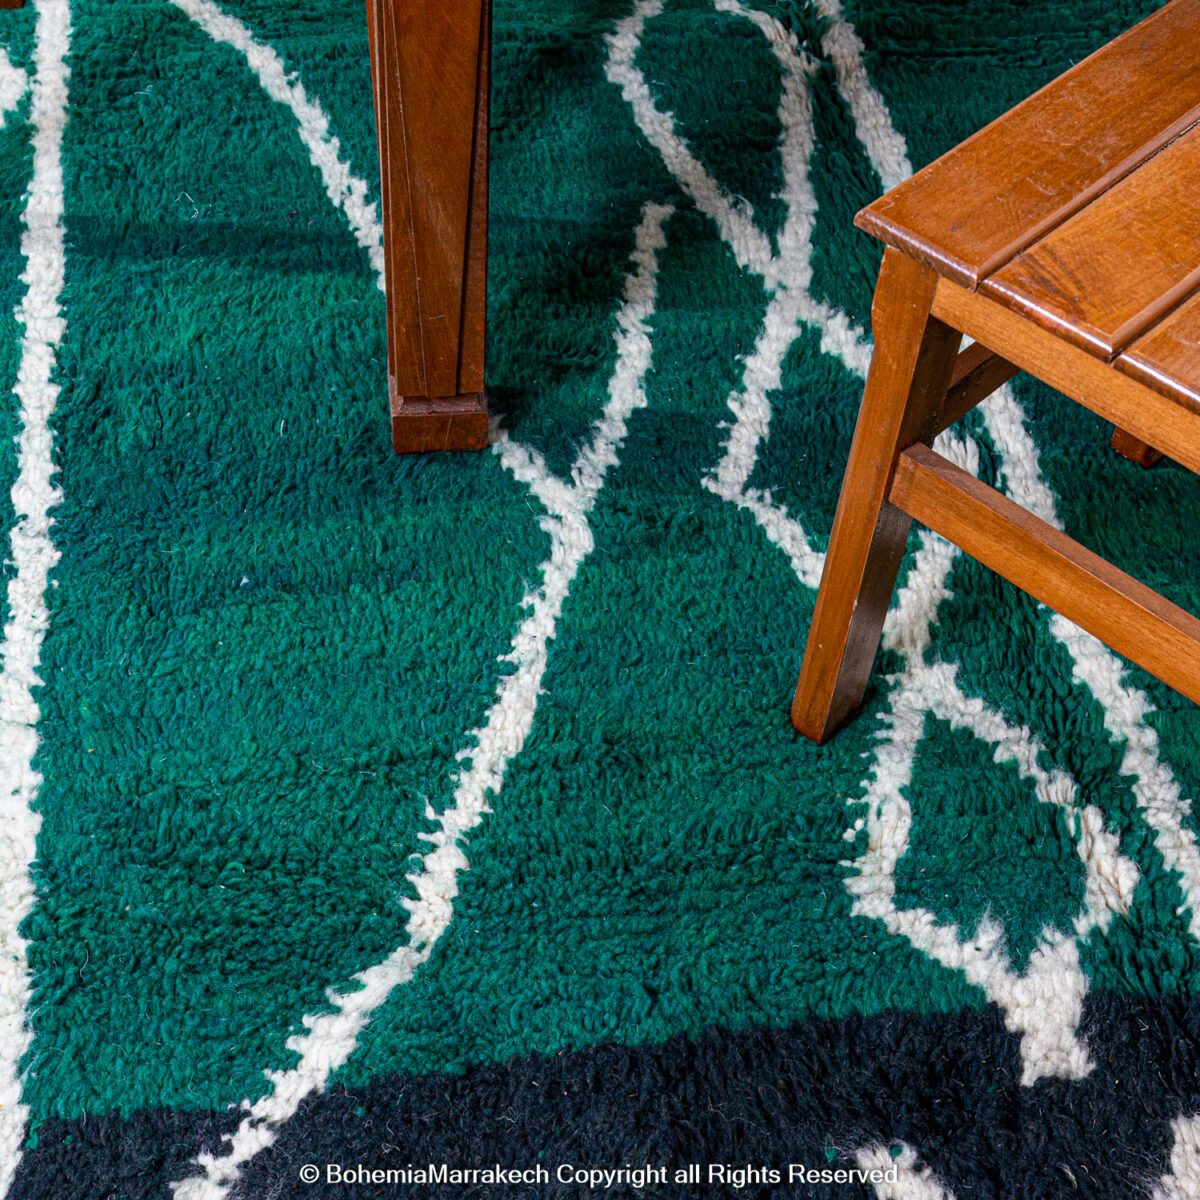 washable area rugs, cheap rugs, checkered rug, 9x12 area rugs, rug cleaning, indoor outdoor rugs, Pottery Barn rugs, Surya rugs, area rugs near me, 9x12 rug, Home Depot rugs, indoor outdoor carpet, outdoor patio rugs, rug stores near me, rug shops near me, outdoor rugs for porch, indoor outdoor area rugs, outdoor patio carpet, checkered carpet, West Elm rugs, large area rugs, black and white rug, green rug, carpet squares, pink rug, oriental rugs, rug pad, shag rug, area rugs for living room, nursery rugs, kitchen runner rugs, 6x9 rug, entryway rug, hallway runner rug, Lowes rugs, carpet stair treads, carpet runners for hallways, kitchen rugs and runners, tufted rug, carpet pad, kitchen carpet runner, stair tread rugs, Lowes carpet rug, wool rugs, sisal rugs, modern rugs, carpet runners, kids rugs, braided rugs, Lulu and Georgia rugs.